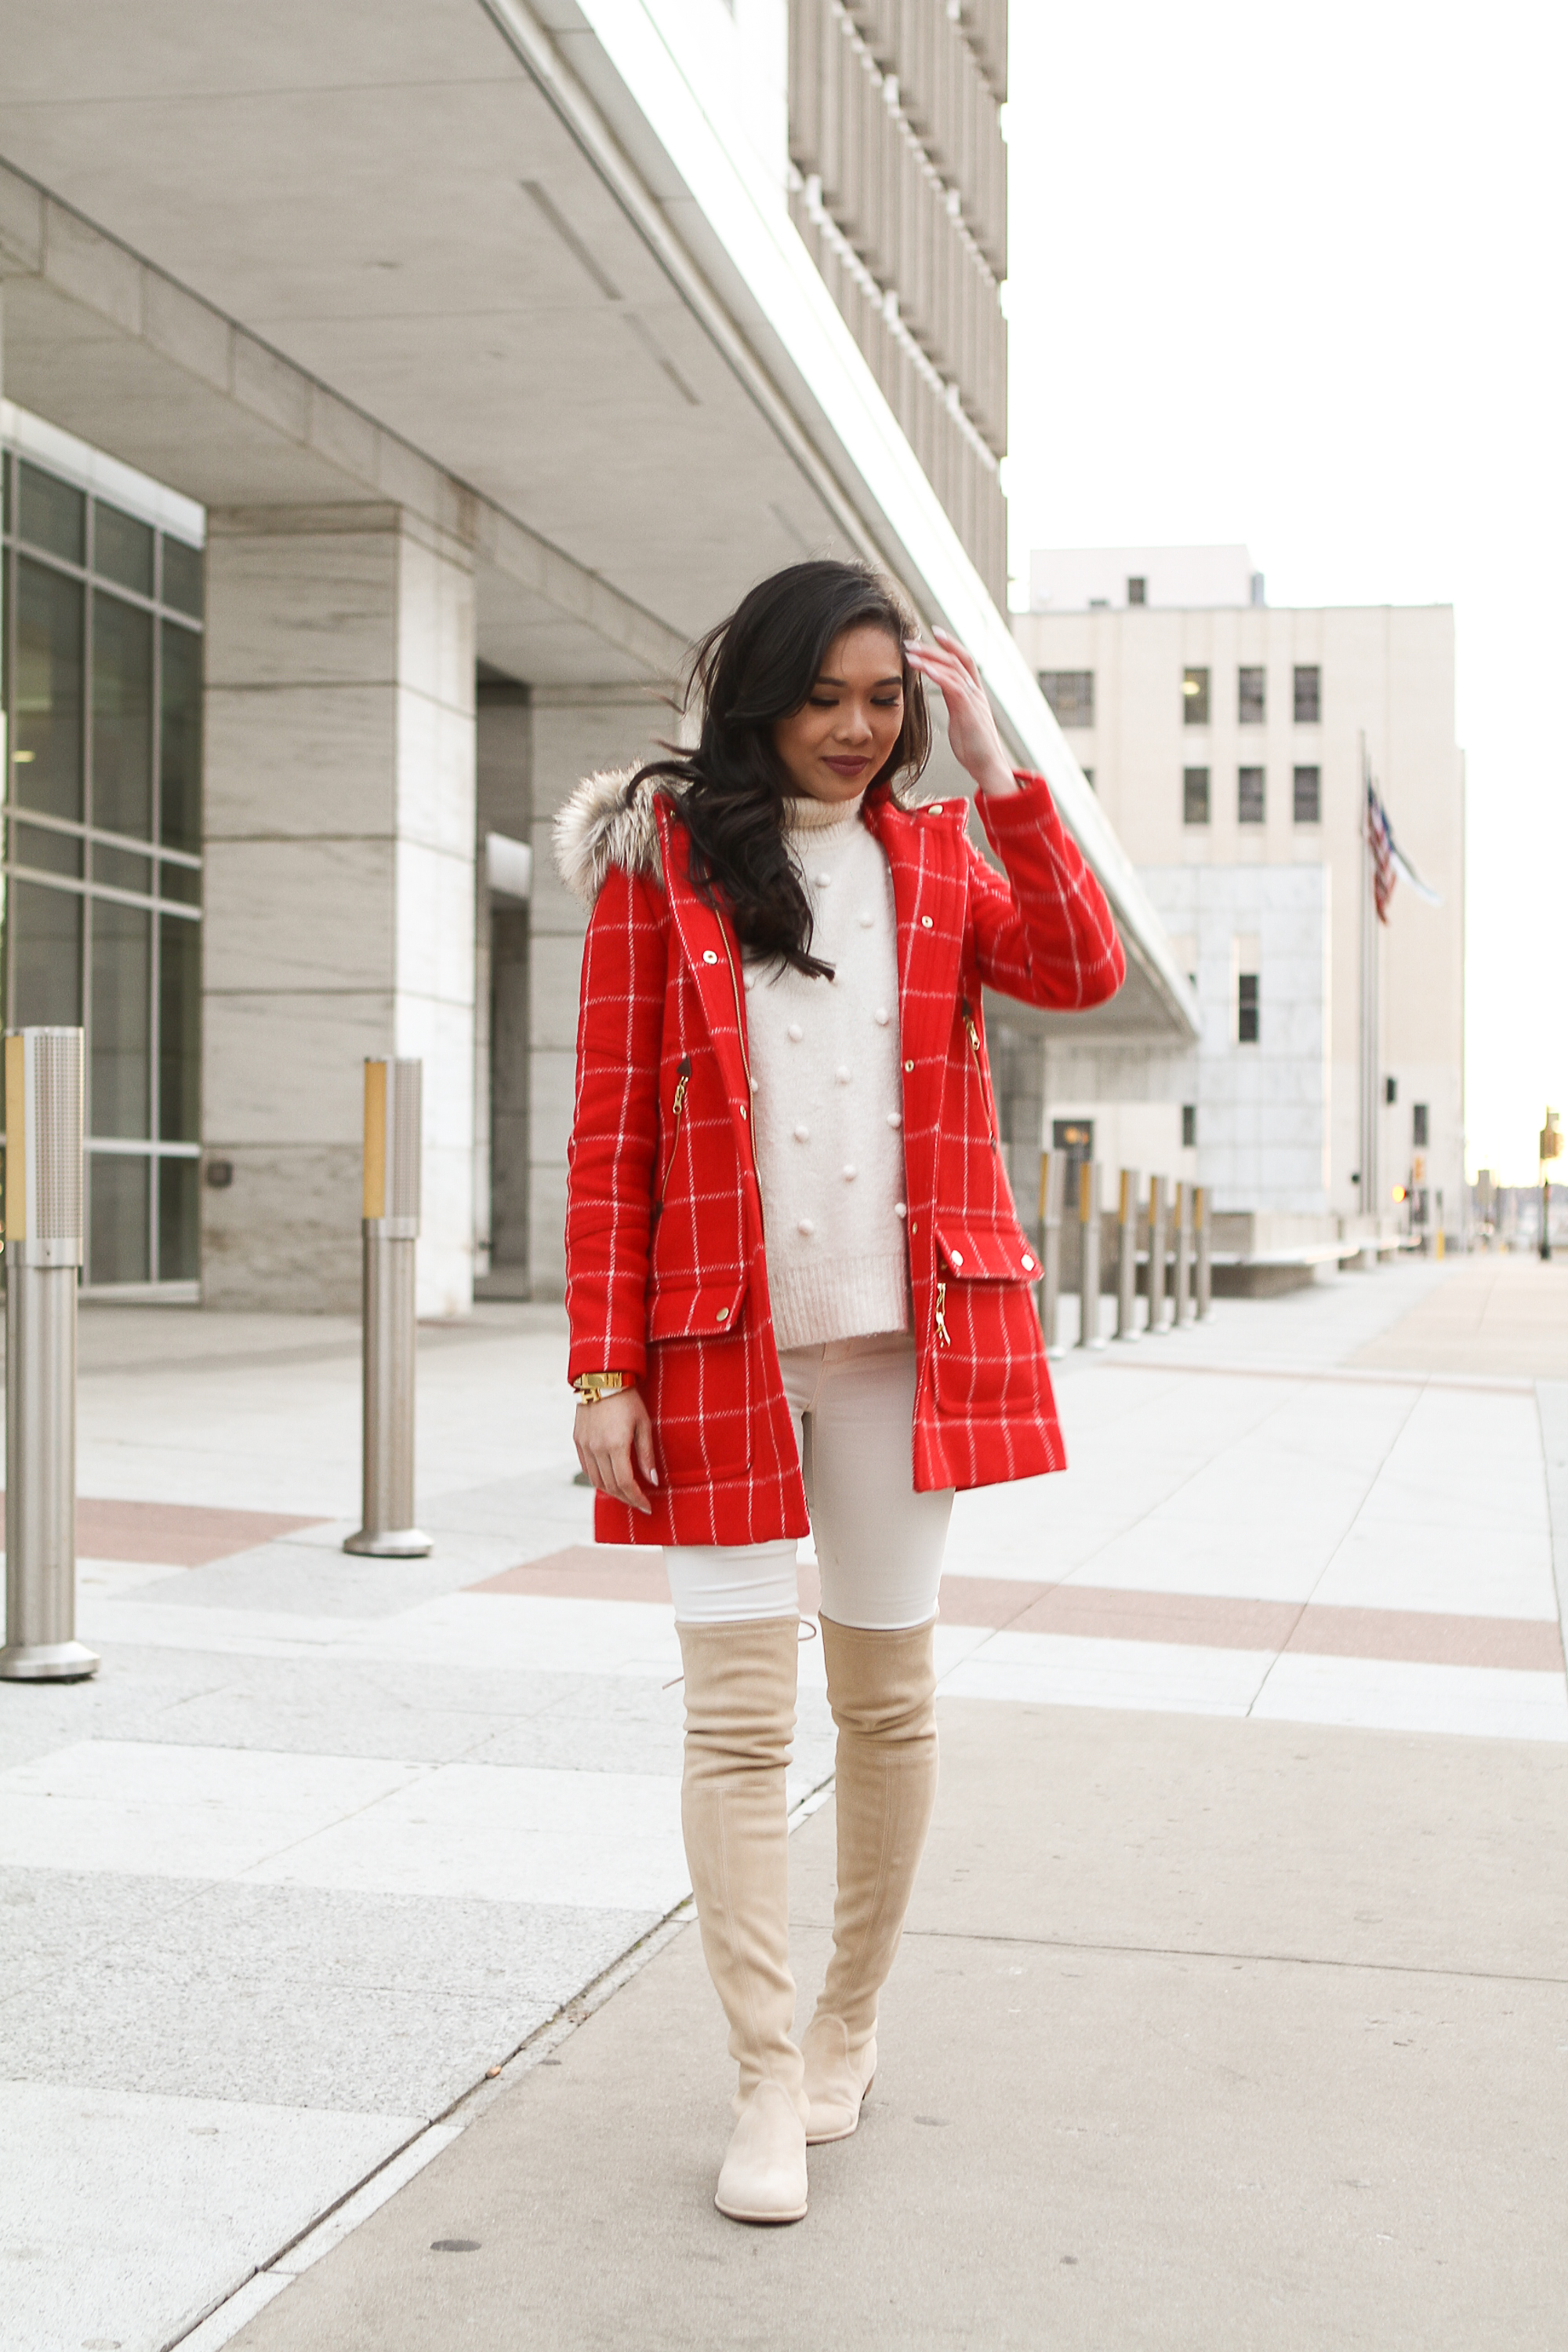 jcrew,chateau,windowpane,parka,faux,fur,hood,removable,warm,wool,coat,red,winter,style,festive,dallas,blogger,downtown,his,and,hers,fashion,petite,blogger,stuart,weitzman,lowland,boots,over,the,knee,suede,buff,ivory,suede,cream,madewell,bobble,head,pom,pom,sweater,loft,leggings,mens,nudie,jeans,flannel,peacoat,pink,peonies,